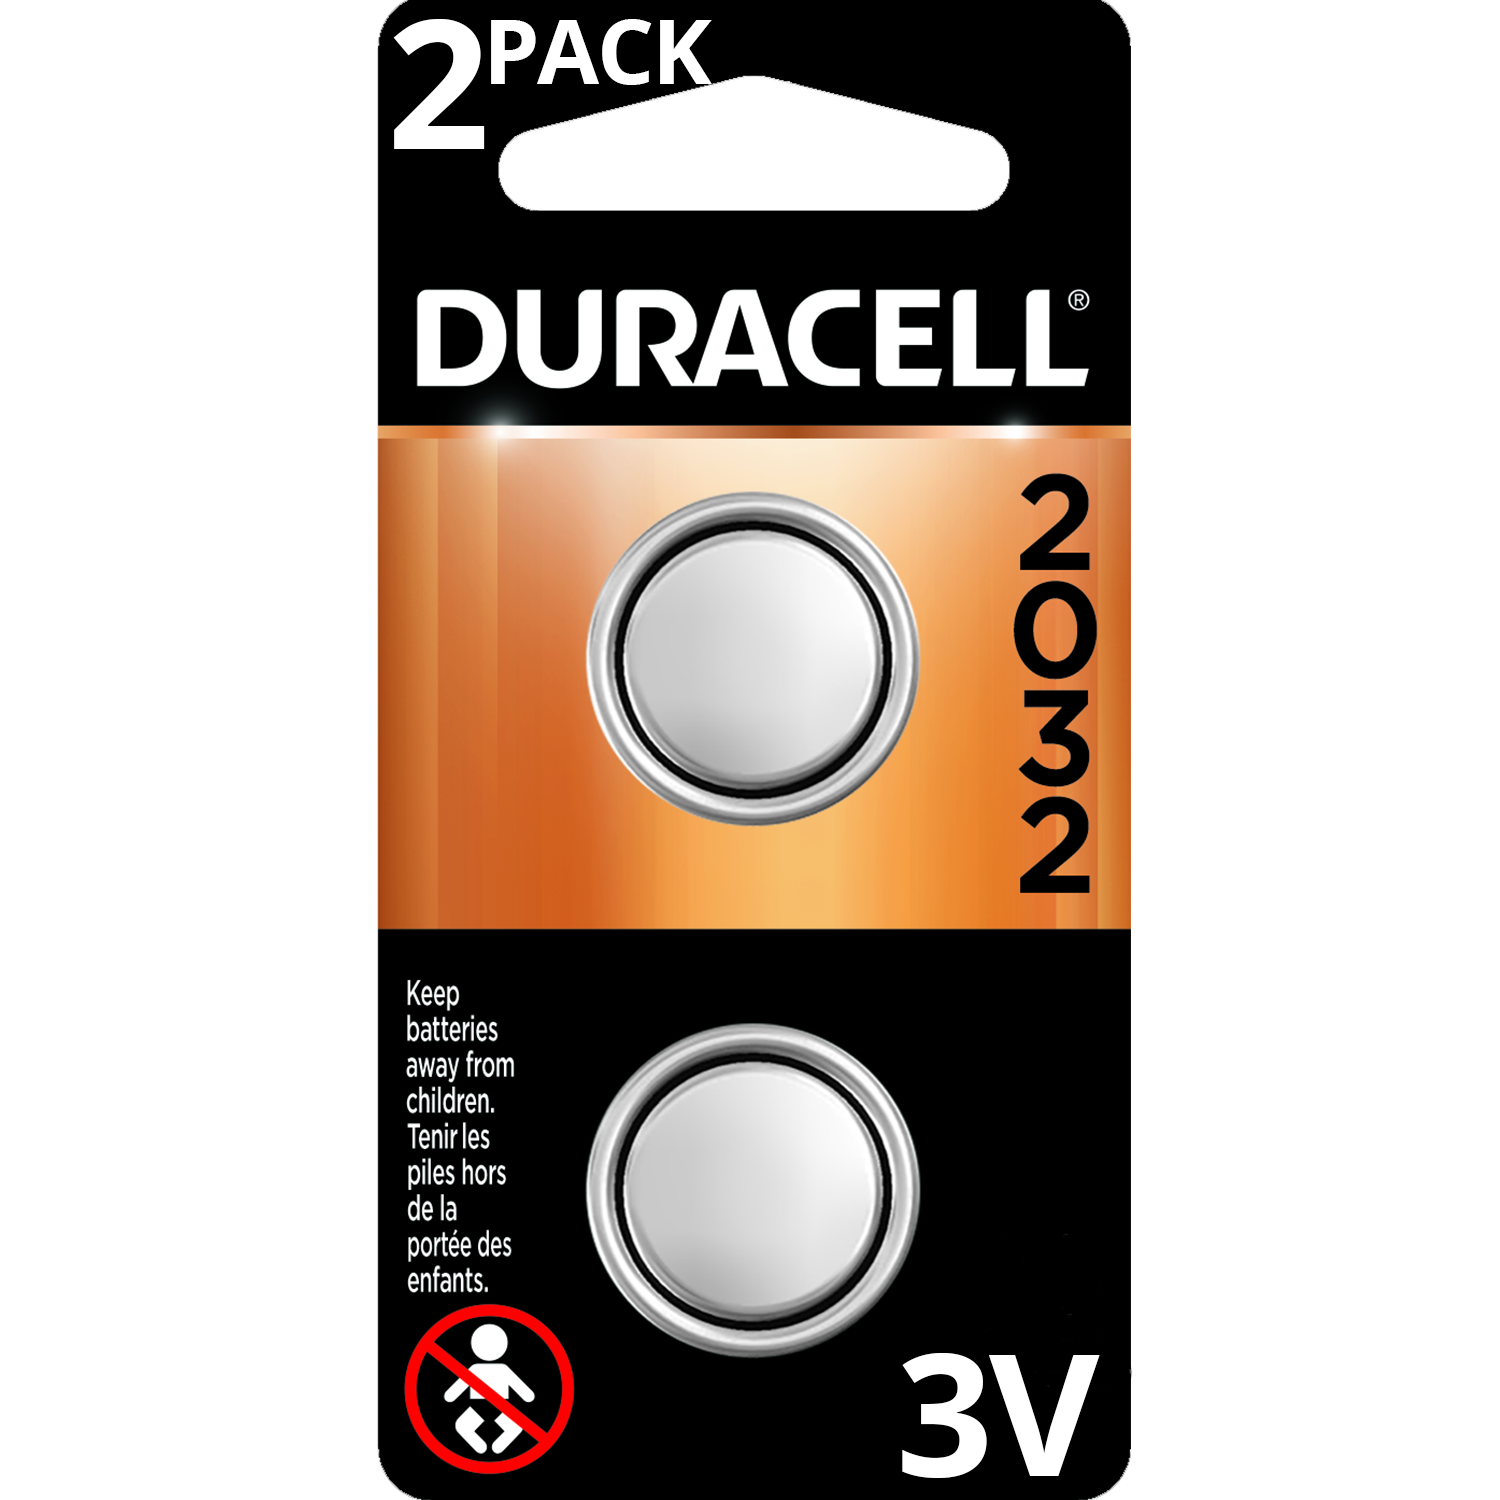 Duracell 2032 3V Lithium Coin Battery, 2-Pack – 2 Ct Batteries